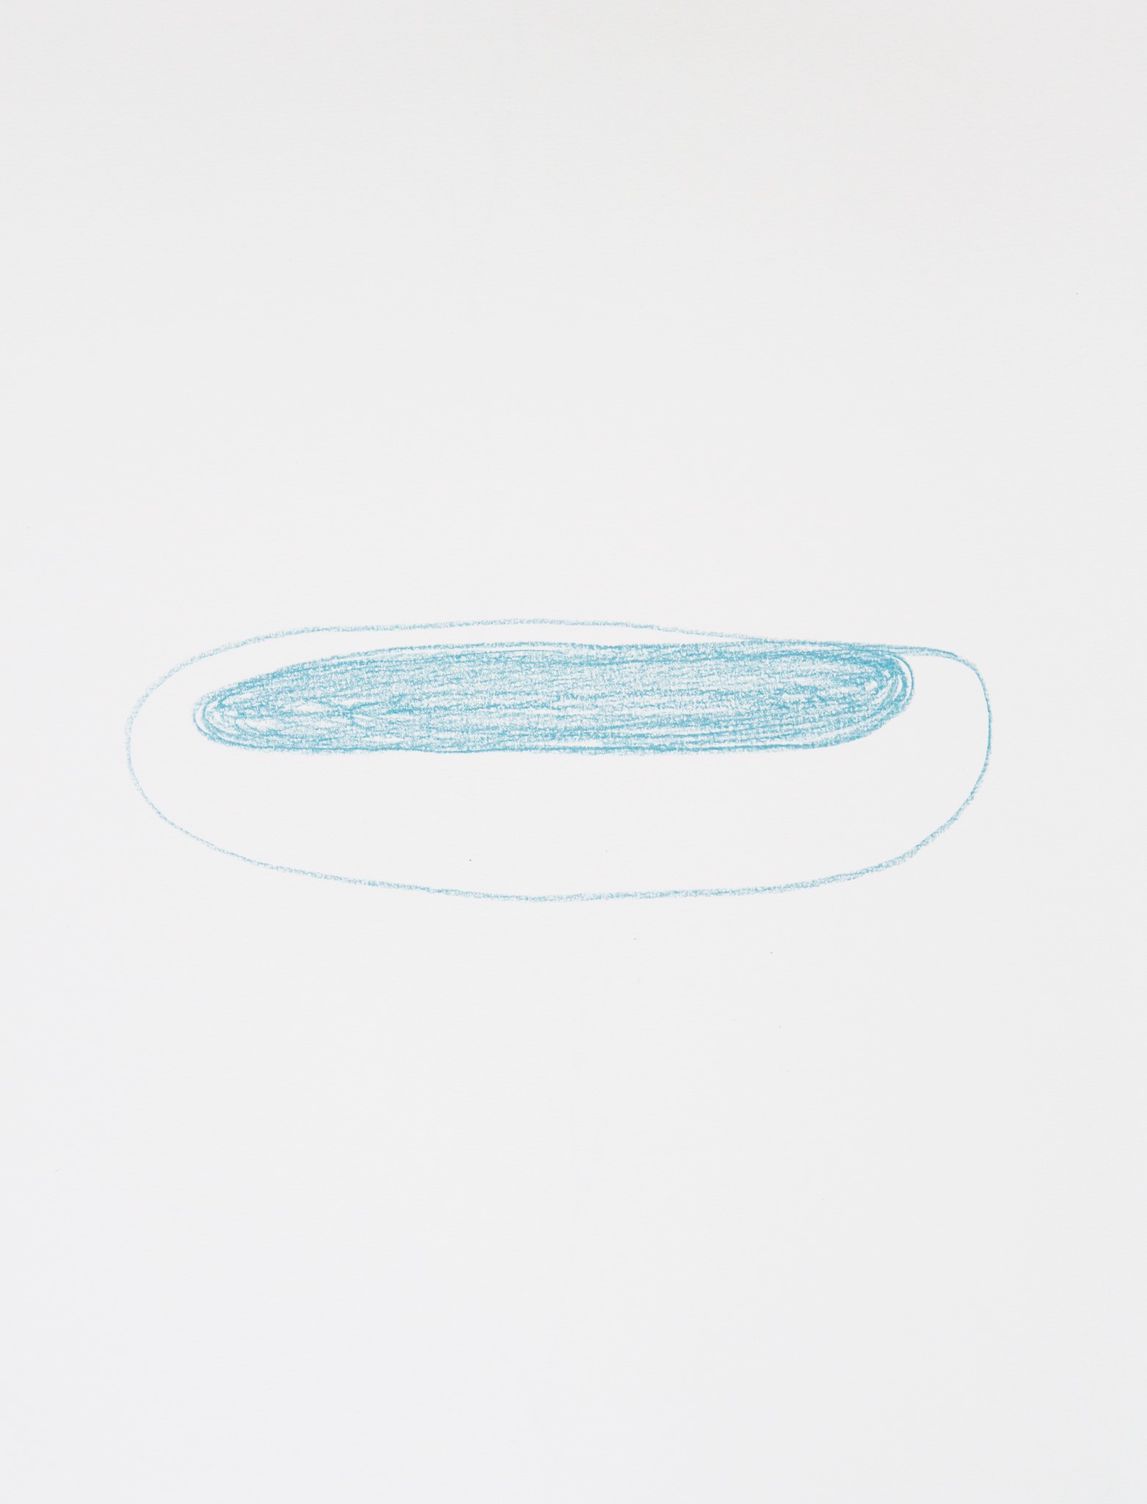 Full (2008), Work on Paper by Claudia Hill